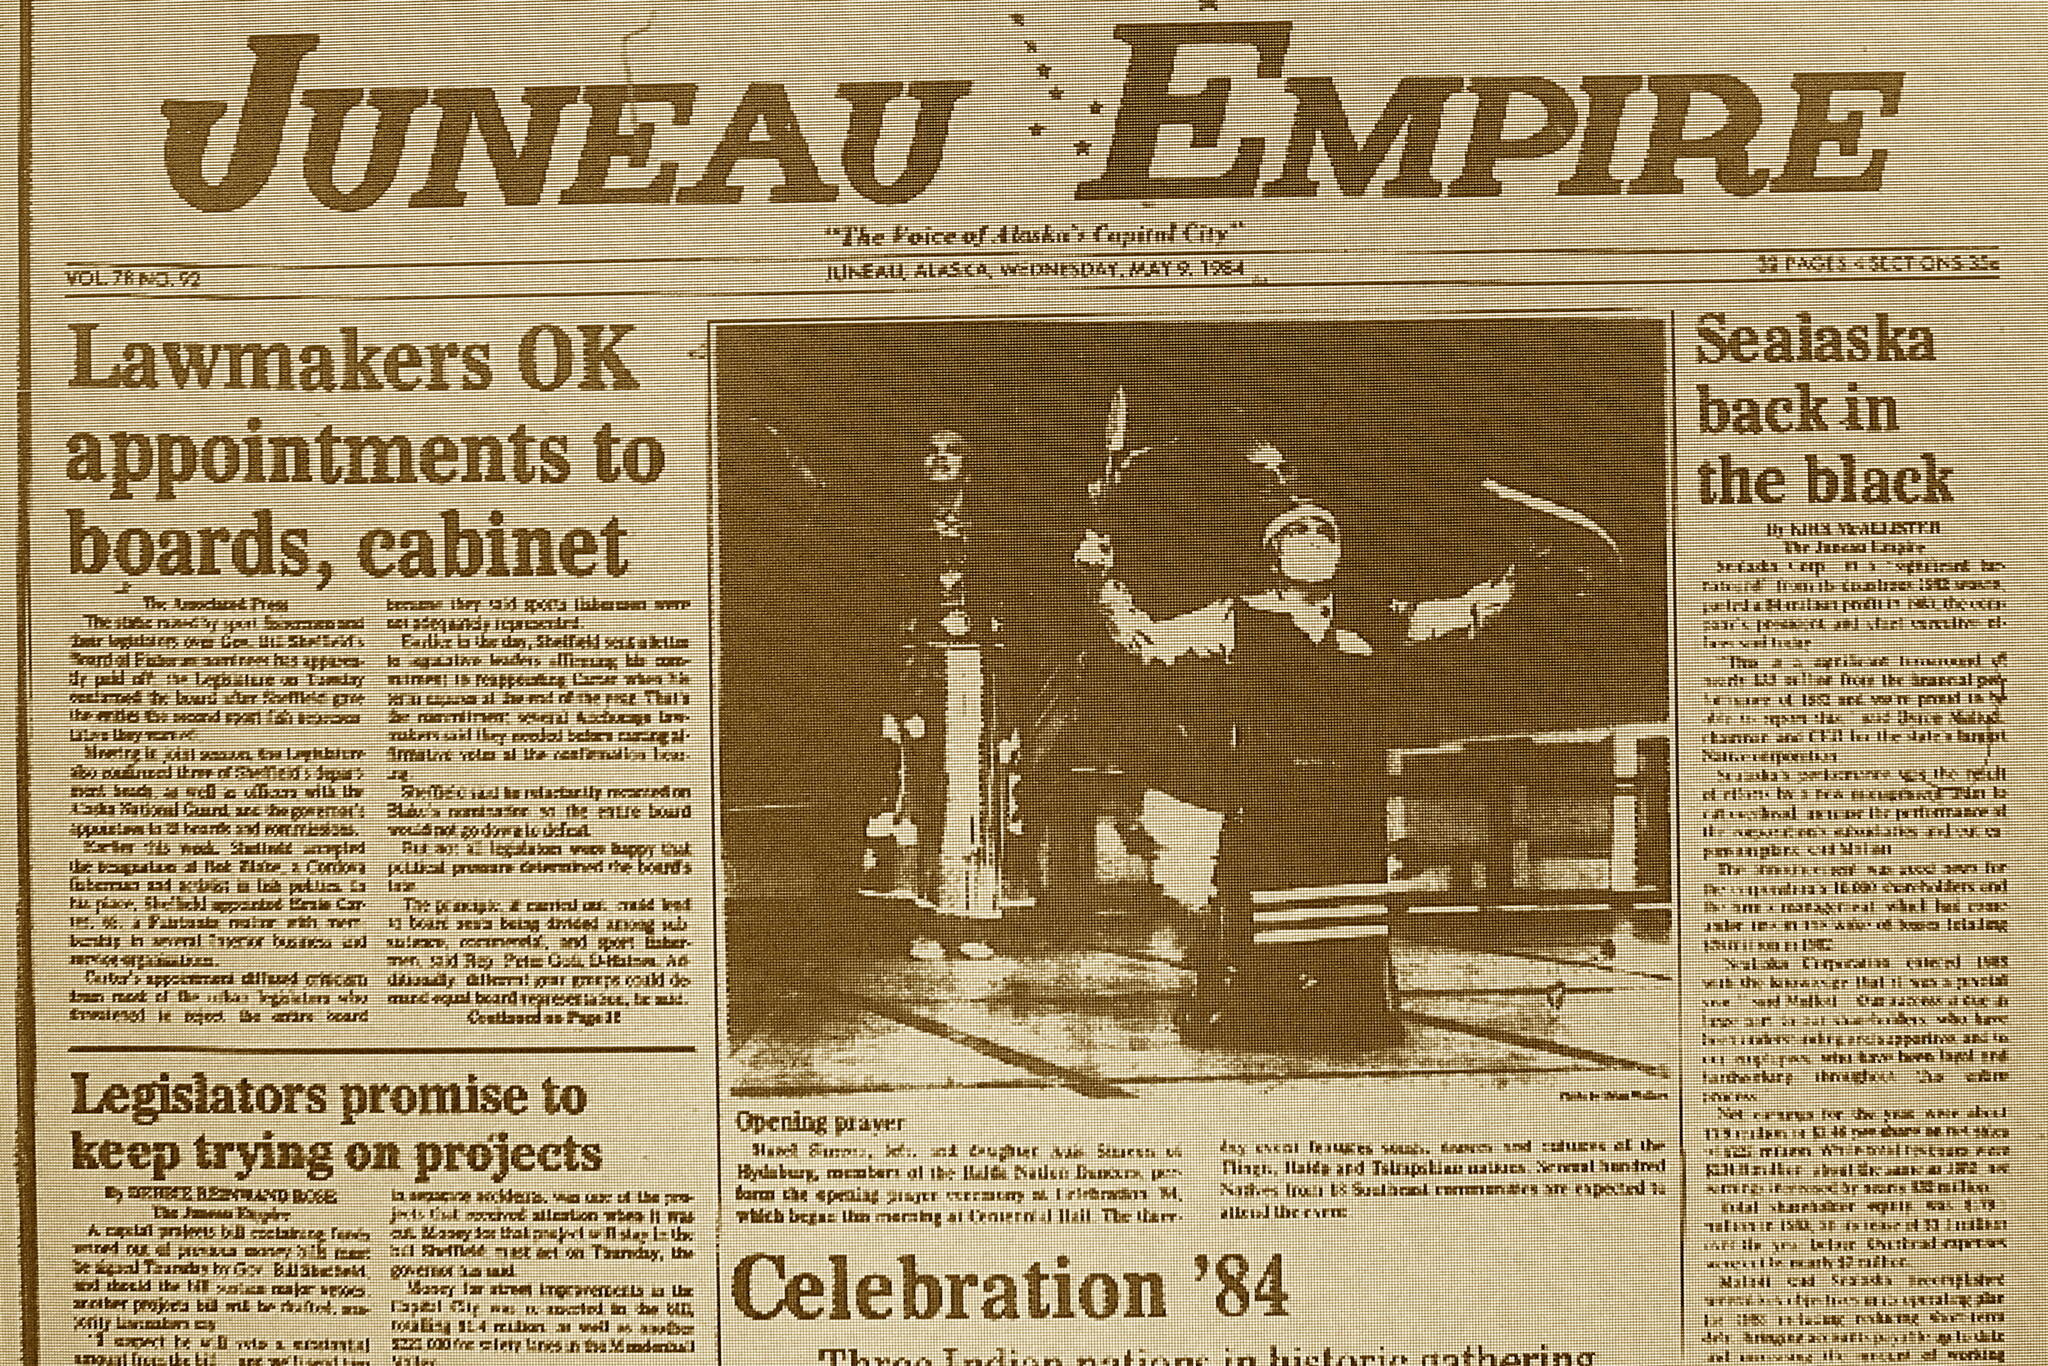 The front page of the Juneau Empire on May 9, 1984. (Mark Sabbatini / Juneau Empire)